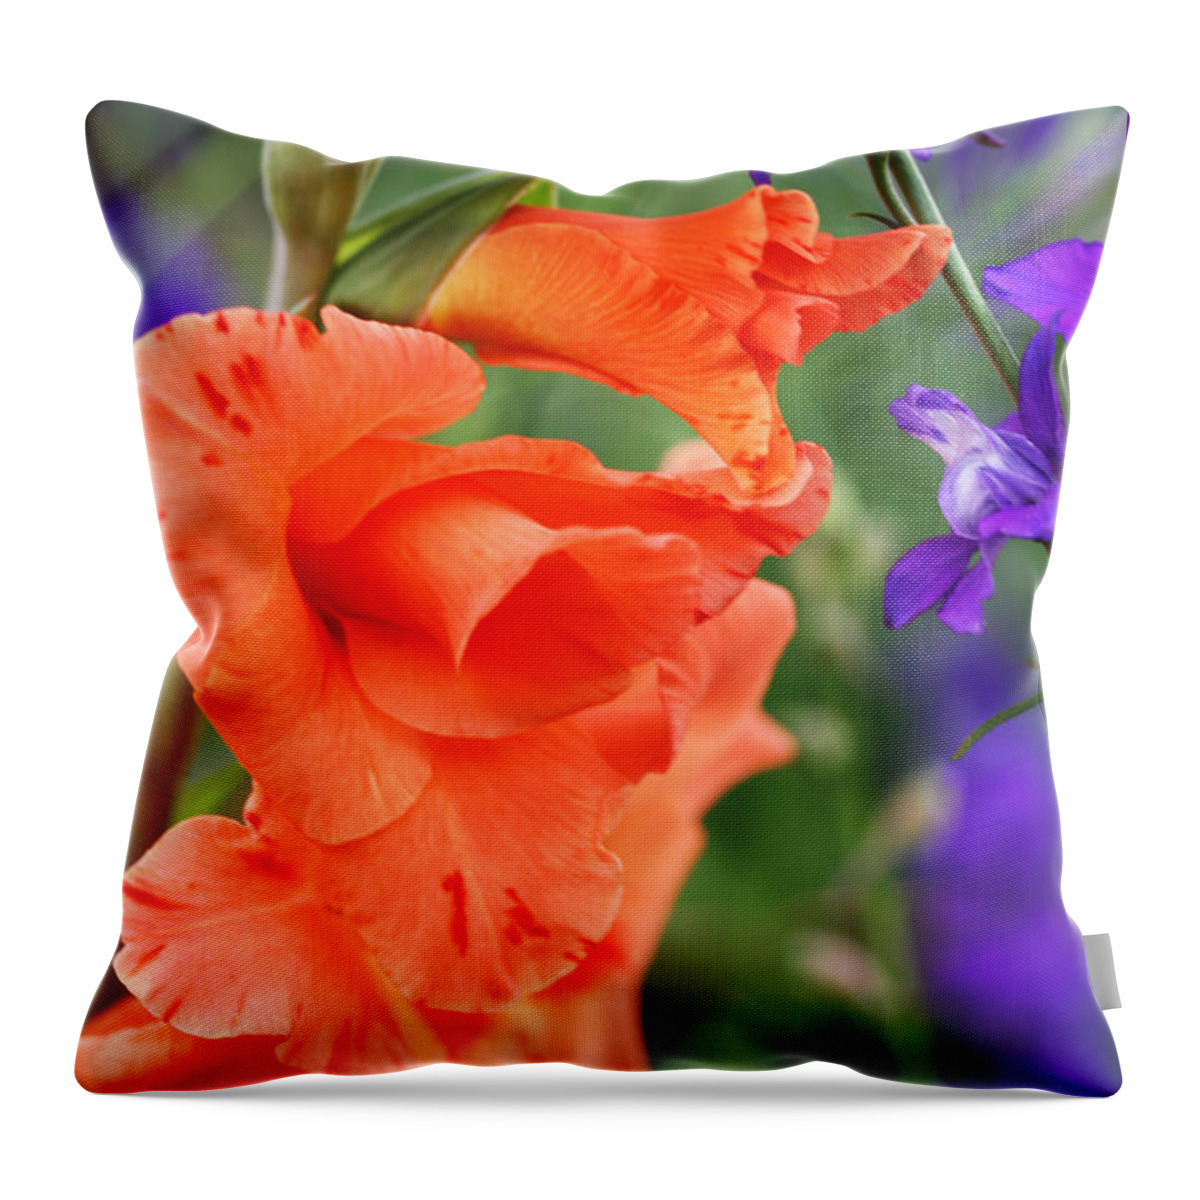 Gladiolus Throw Pillow featuring the photograph Dynamic Gladiolus by Tammy Pool